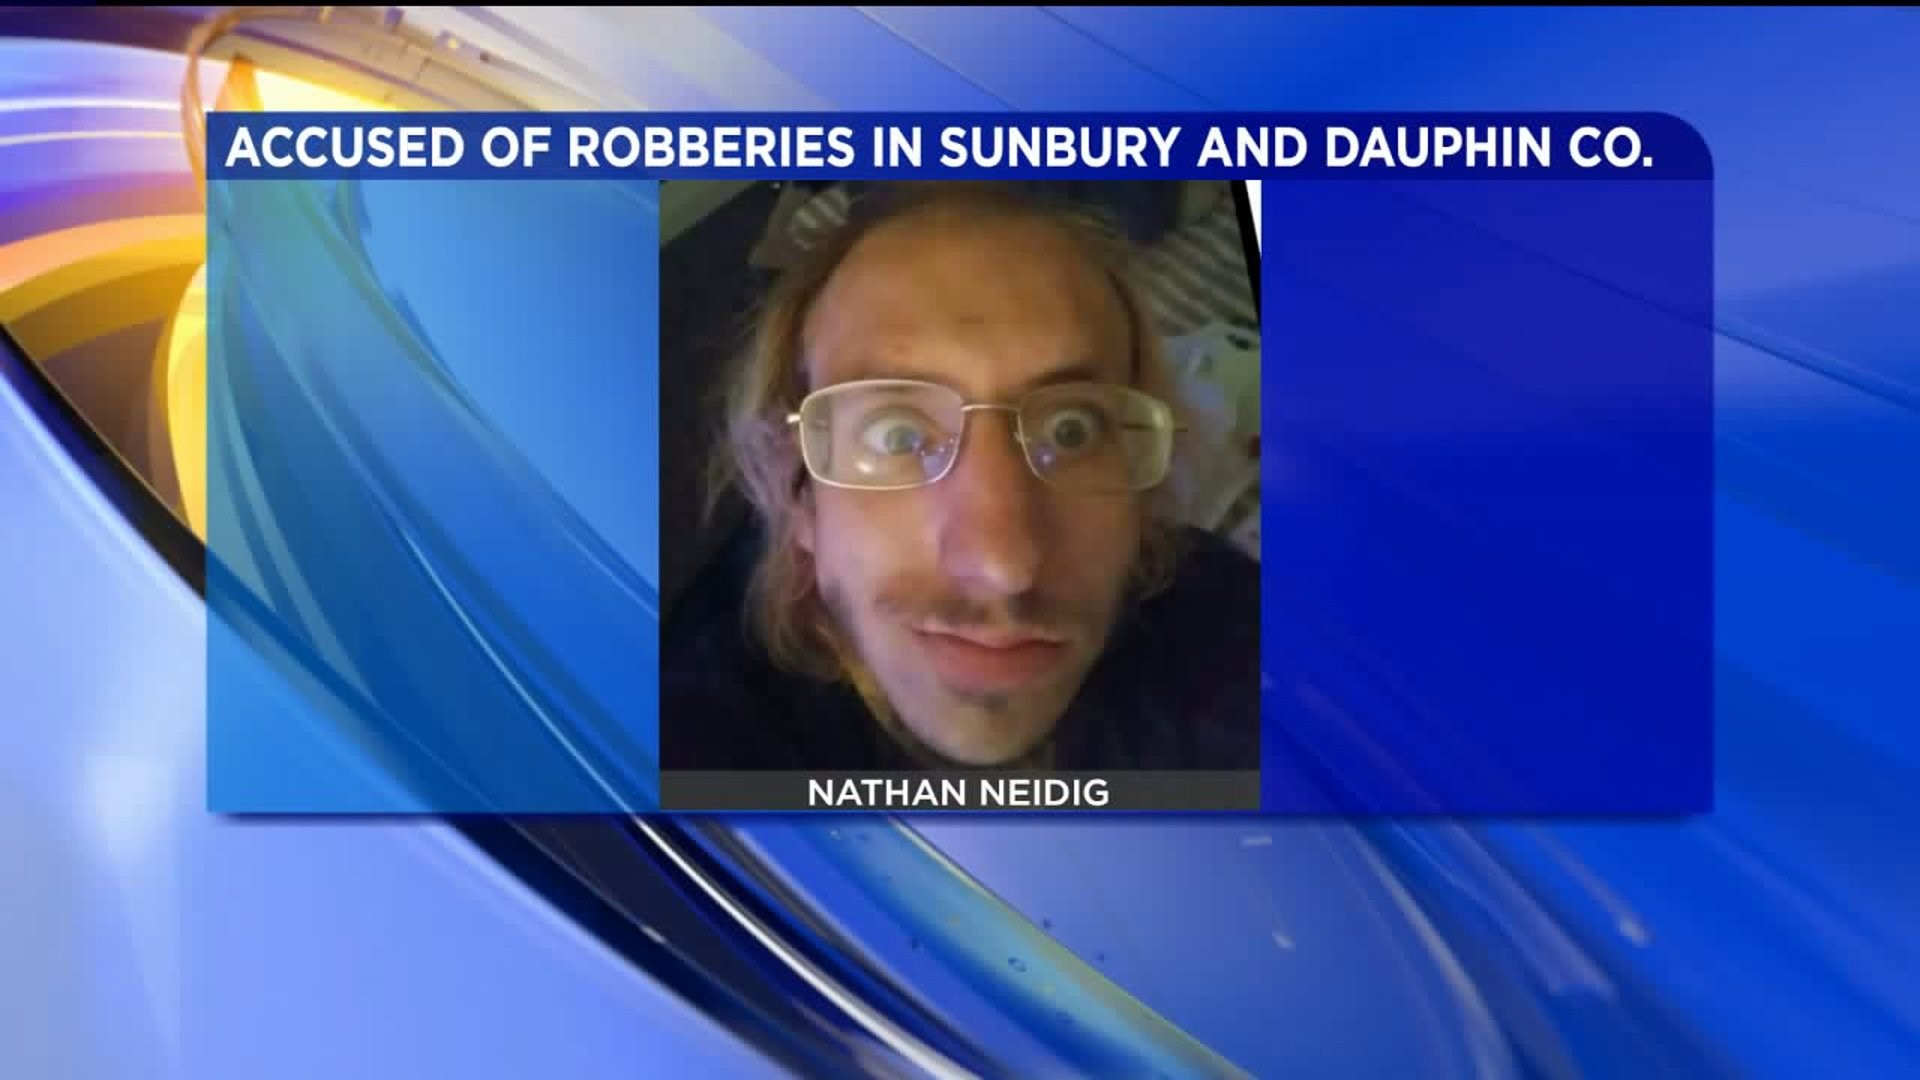 Man Accused of Robbing Store with Machete Arrested